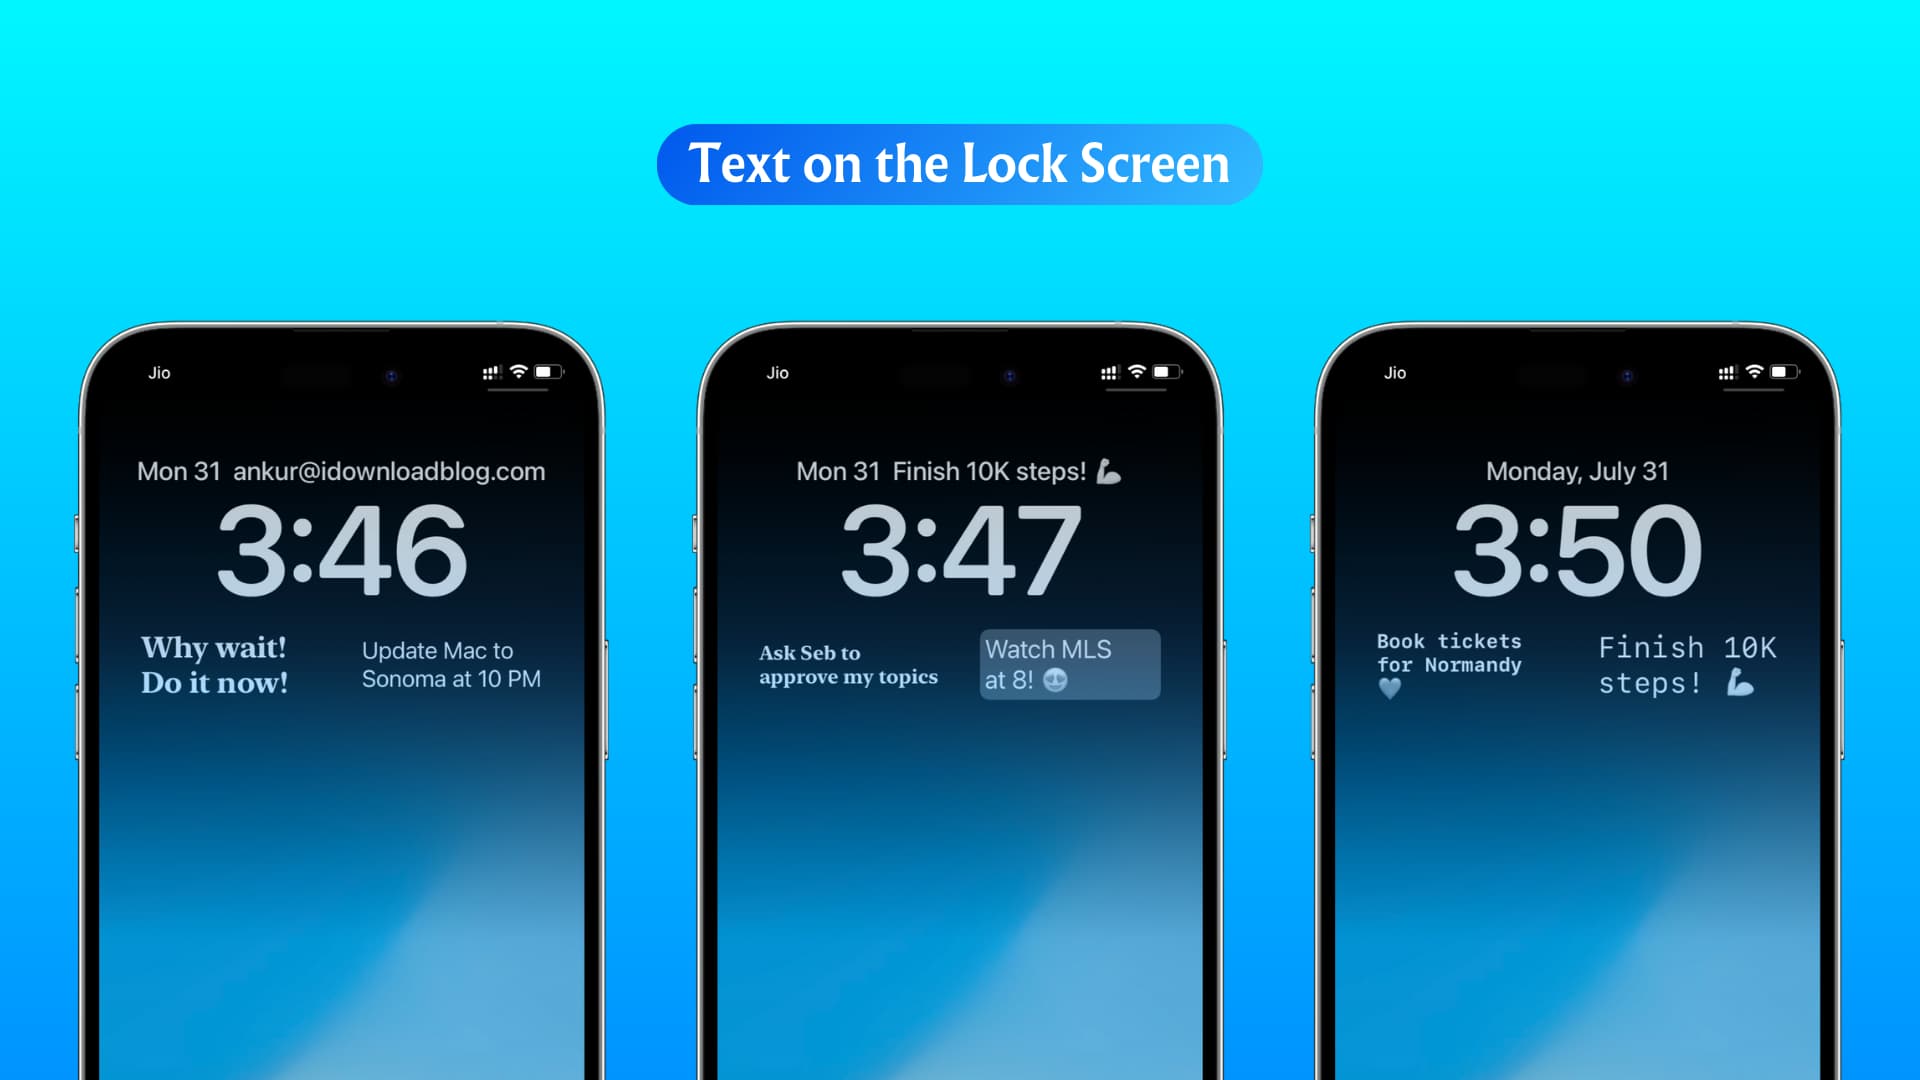 How to add custom text to your iPhone or iPad Lock Screen